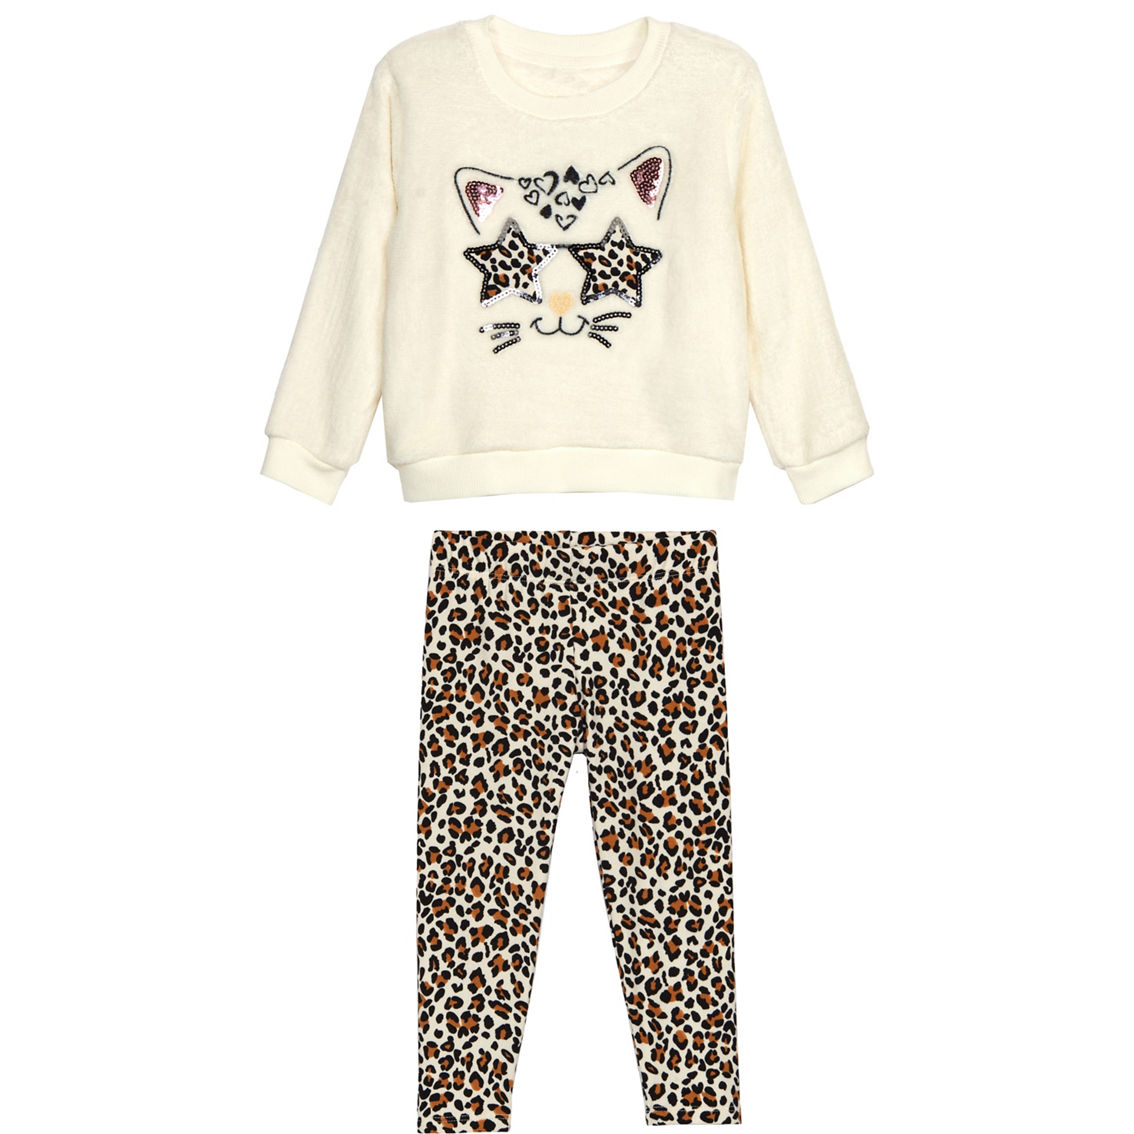 Sweet Butterfly Toddler Girls Leopard Print Kitty Top and Leggings 2 pc. Set